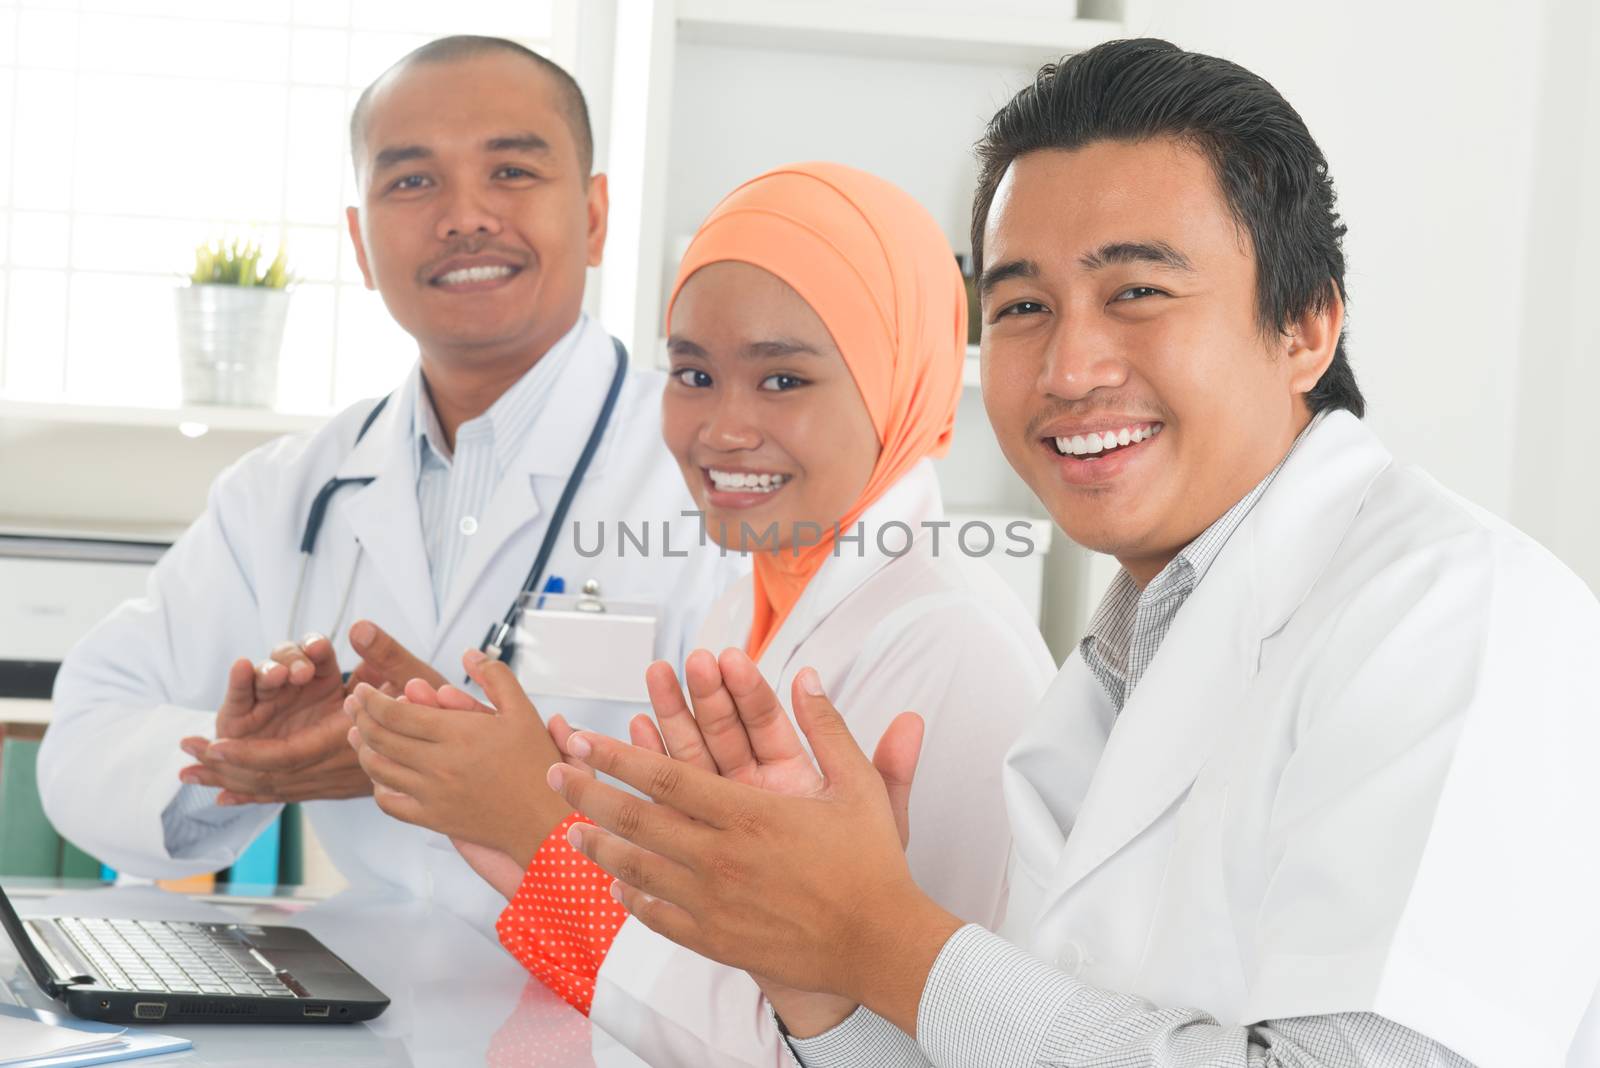 Medical doctors clapping hands during meeting on desk inside hospital room. Southeast Asian Muslim medical people.